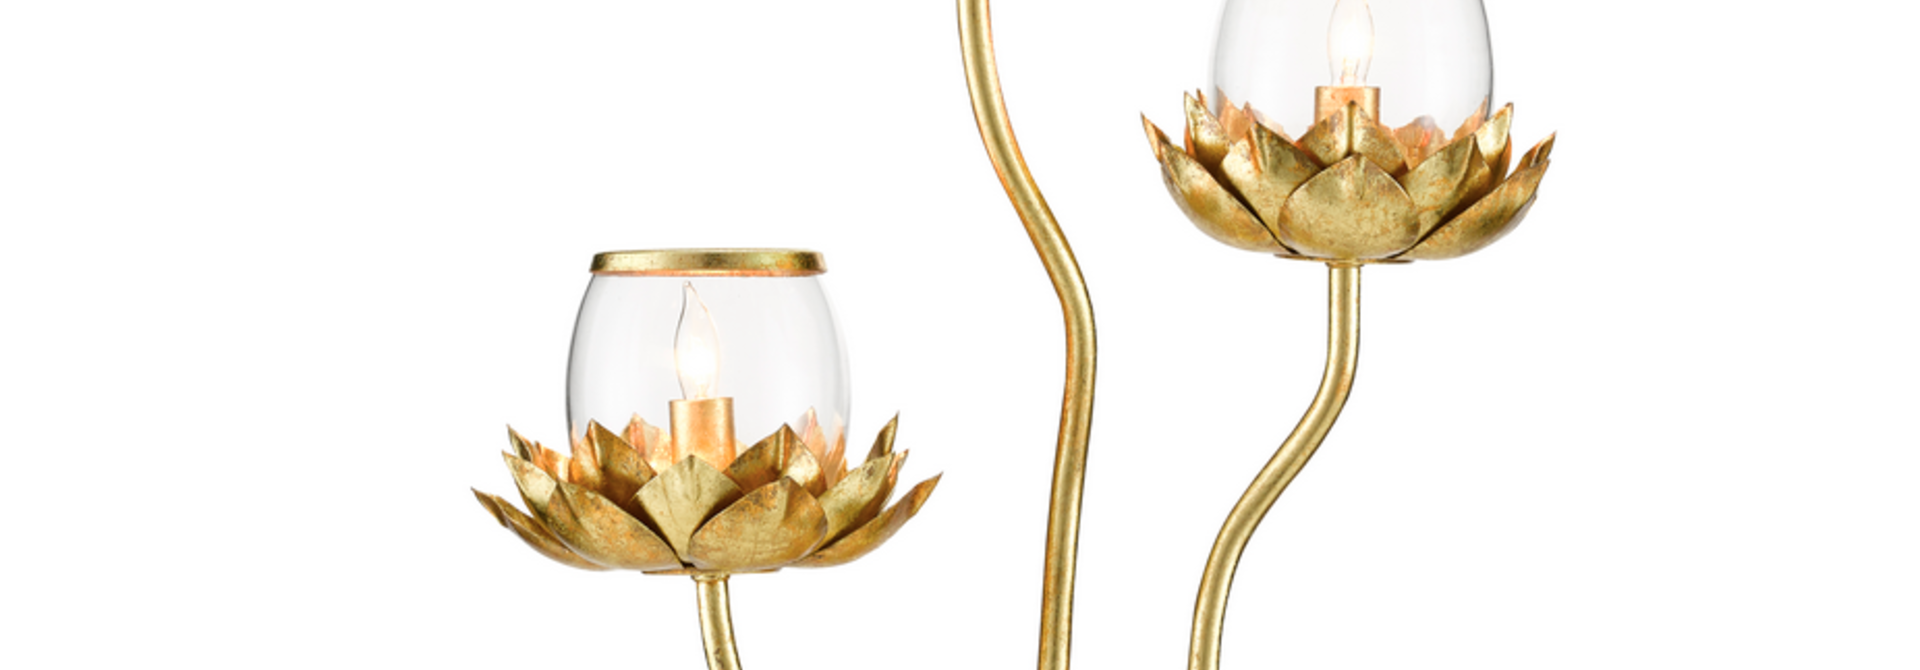 Bellerive | The Sconce Collection, Gold Leaf - 17 Inch x 12 Inch x 23.5 Inch